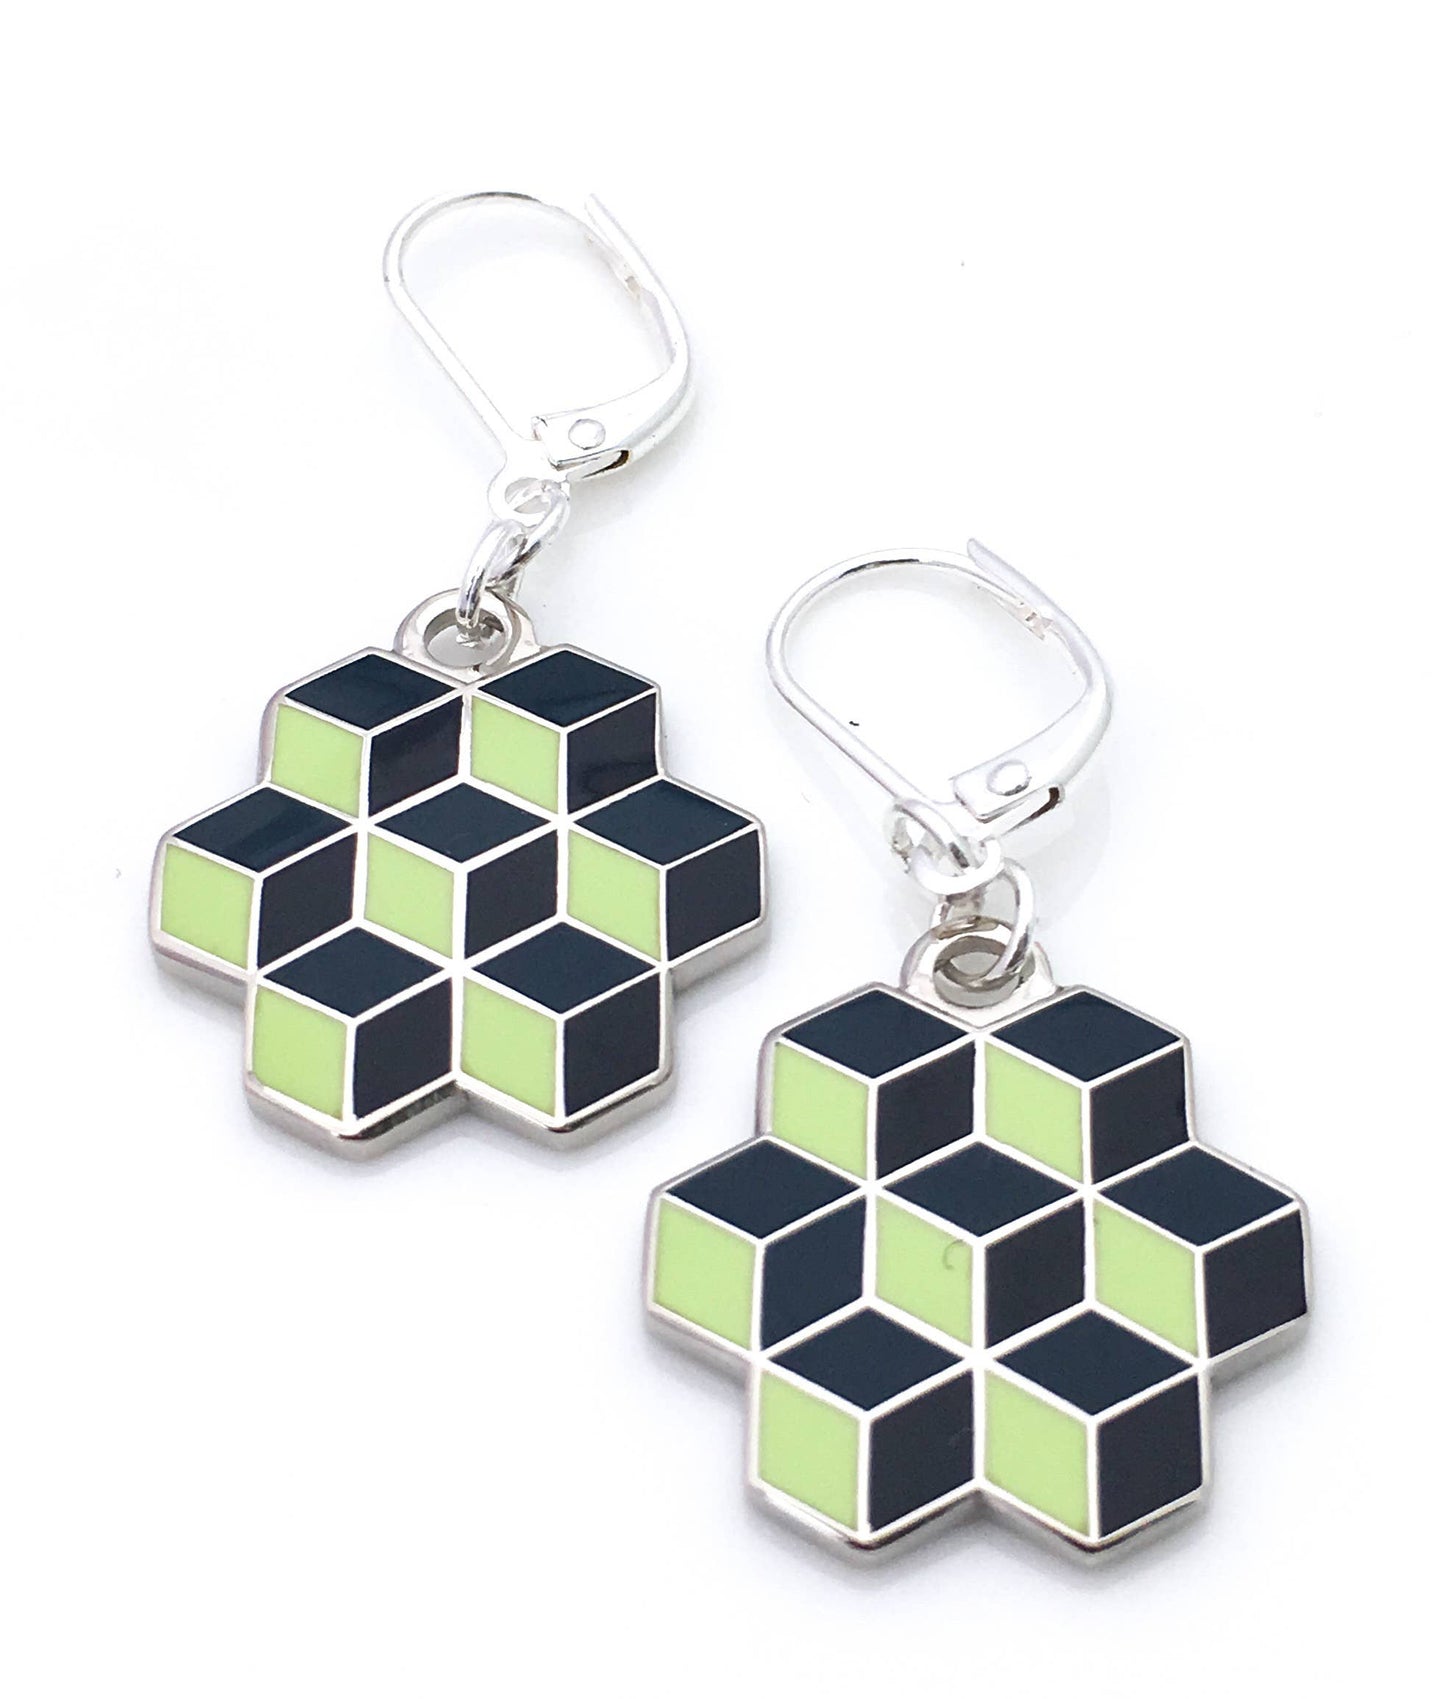 Earrings with optical illusion of stacked black enamel cubes in an pentagon shape